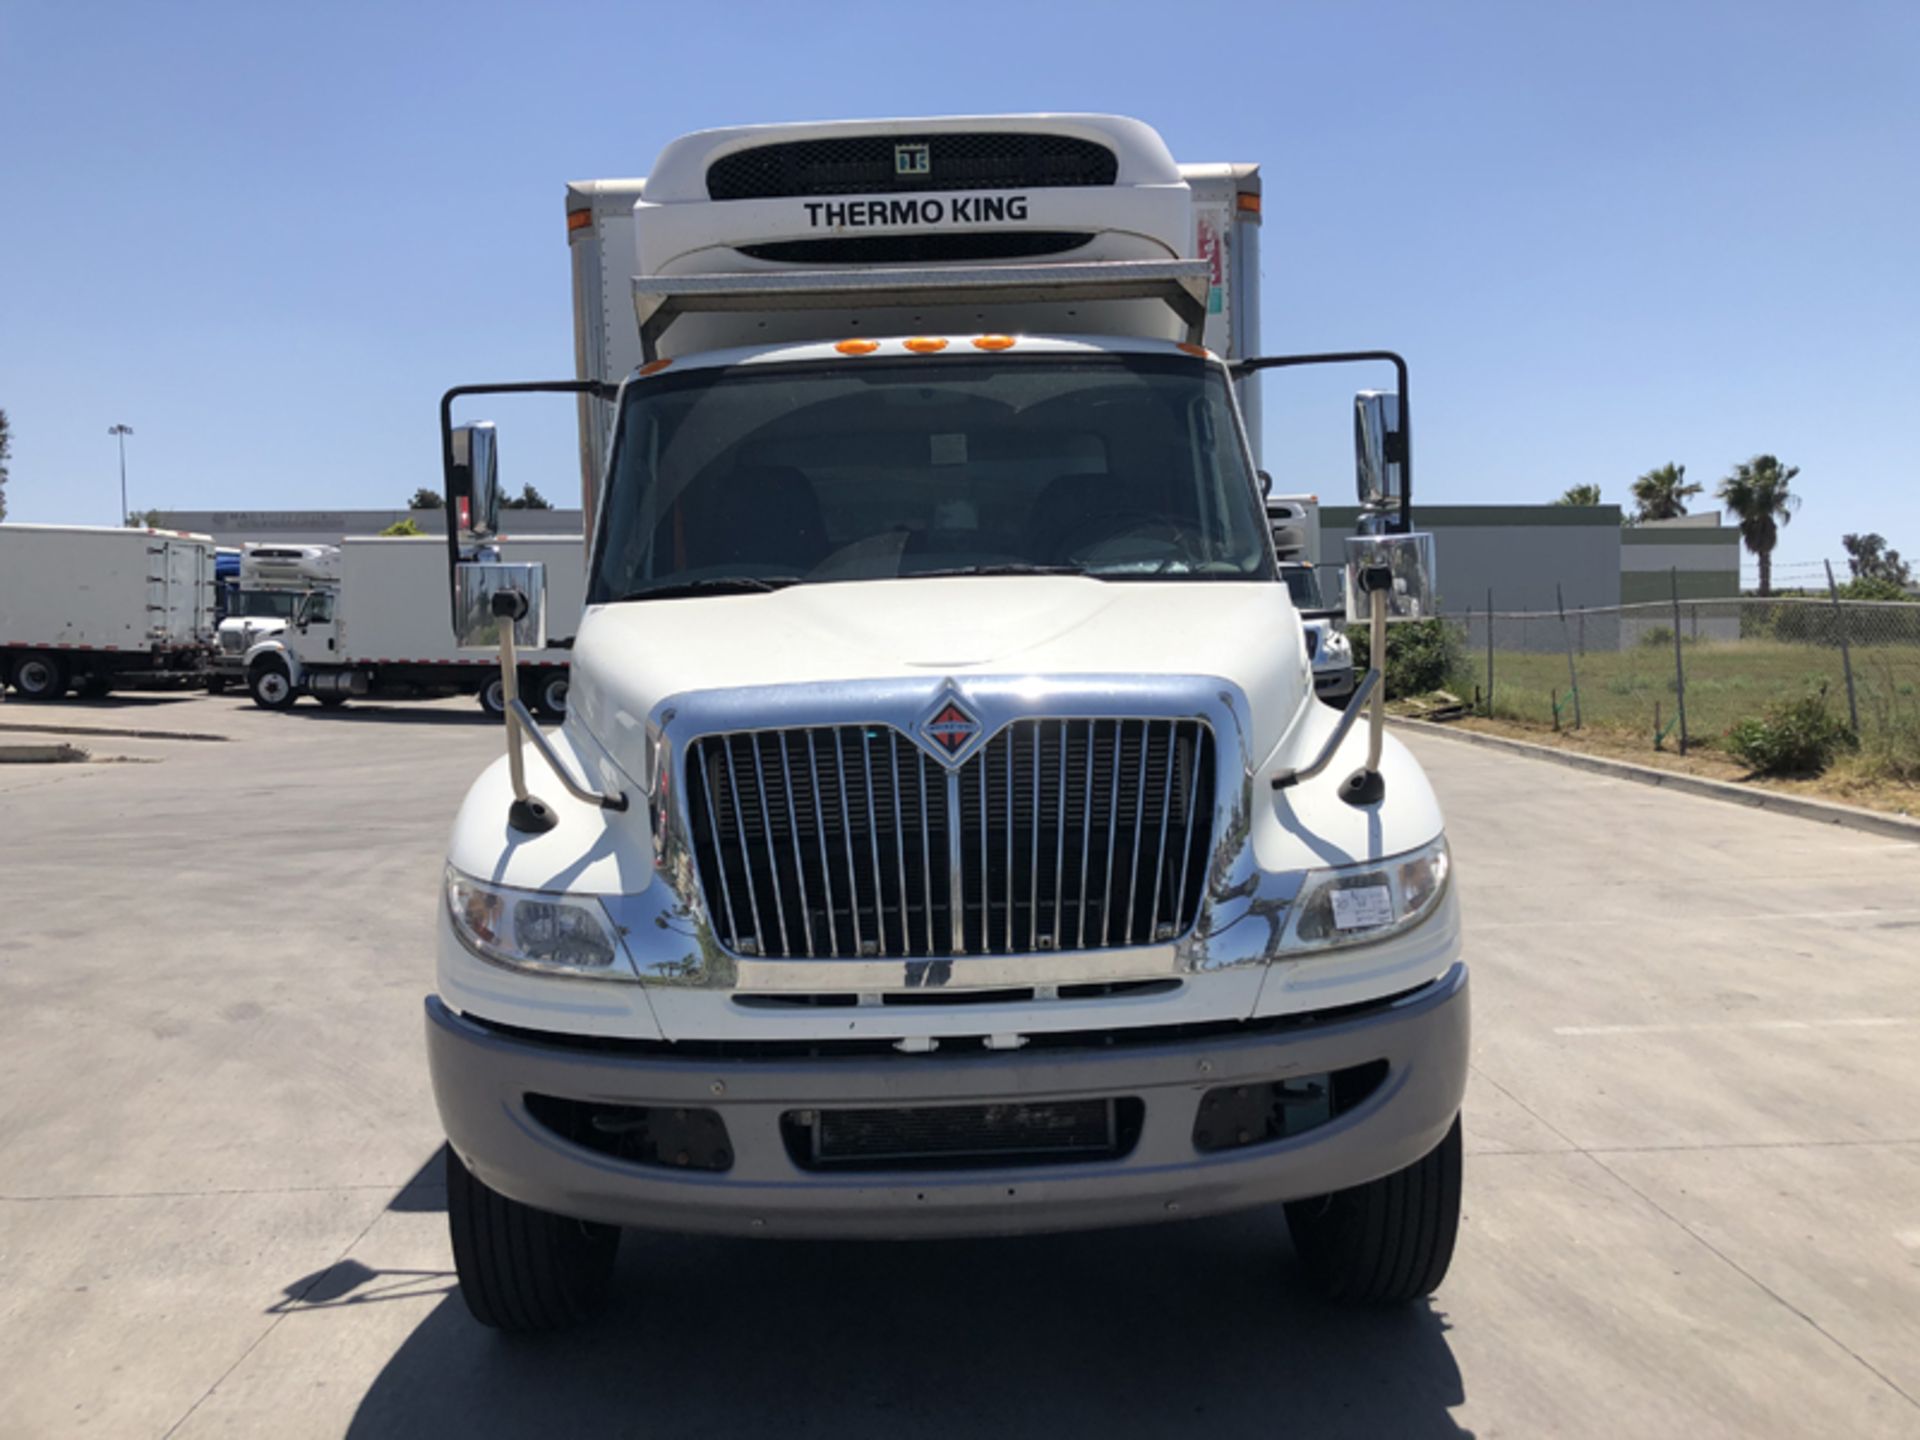 2018 INTERNATIONAL 4400 SBA 6X4 REFRIGERATED BOX TRUCK VIN#: 1HTMSTAR9JH528880, Approx Miles: 85689, - Image 2 of 10